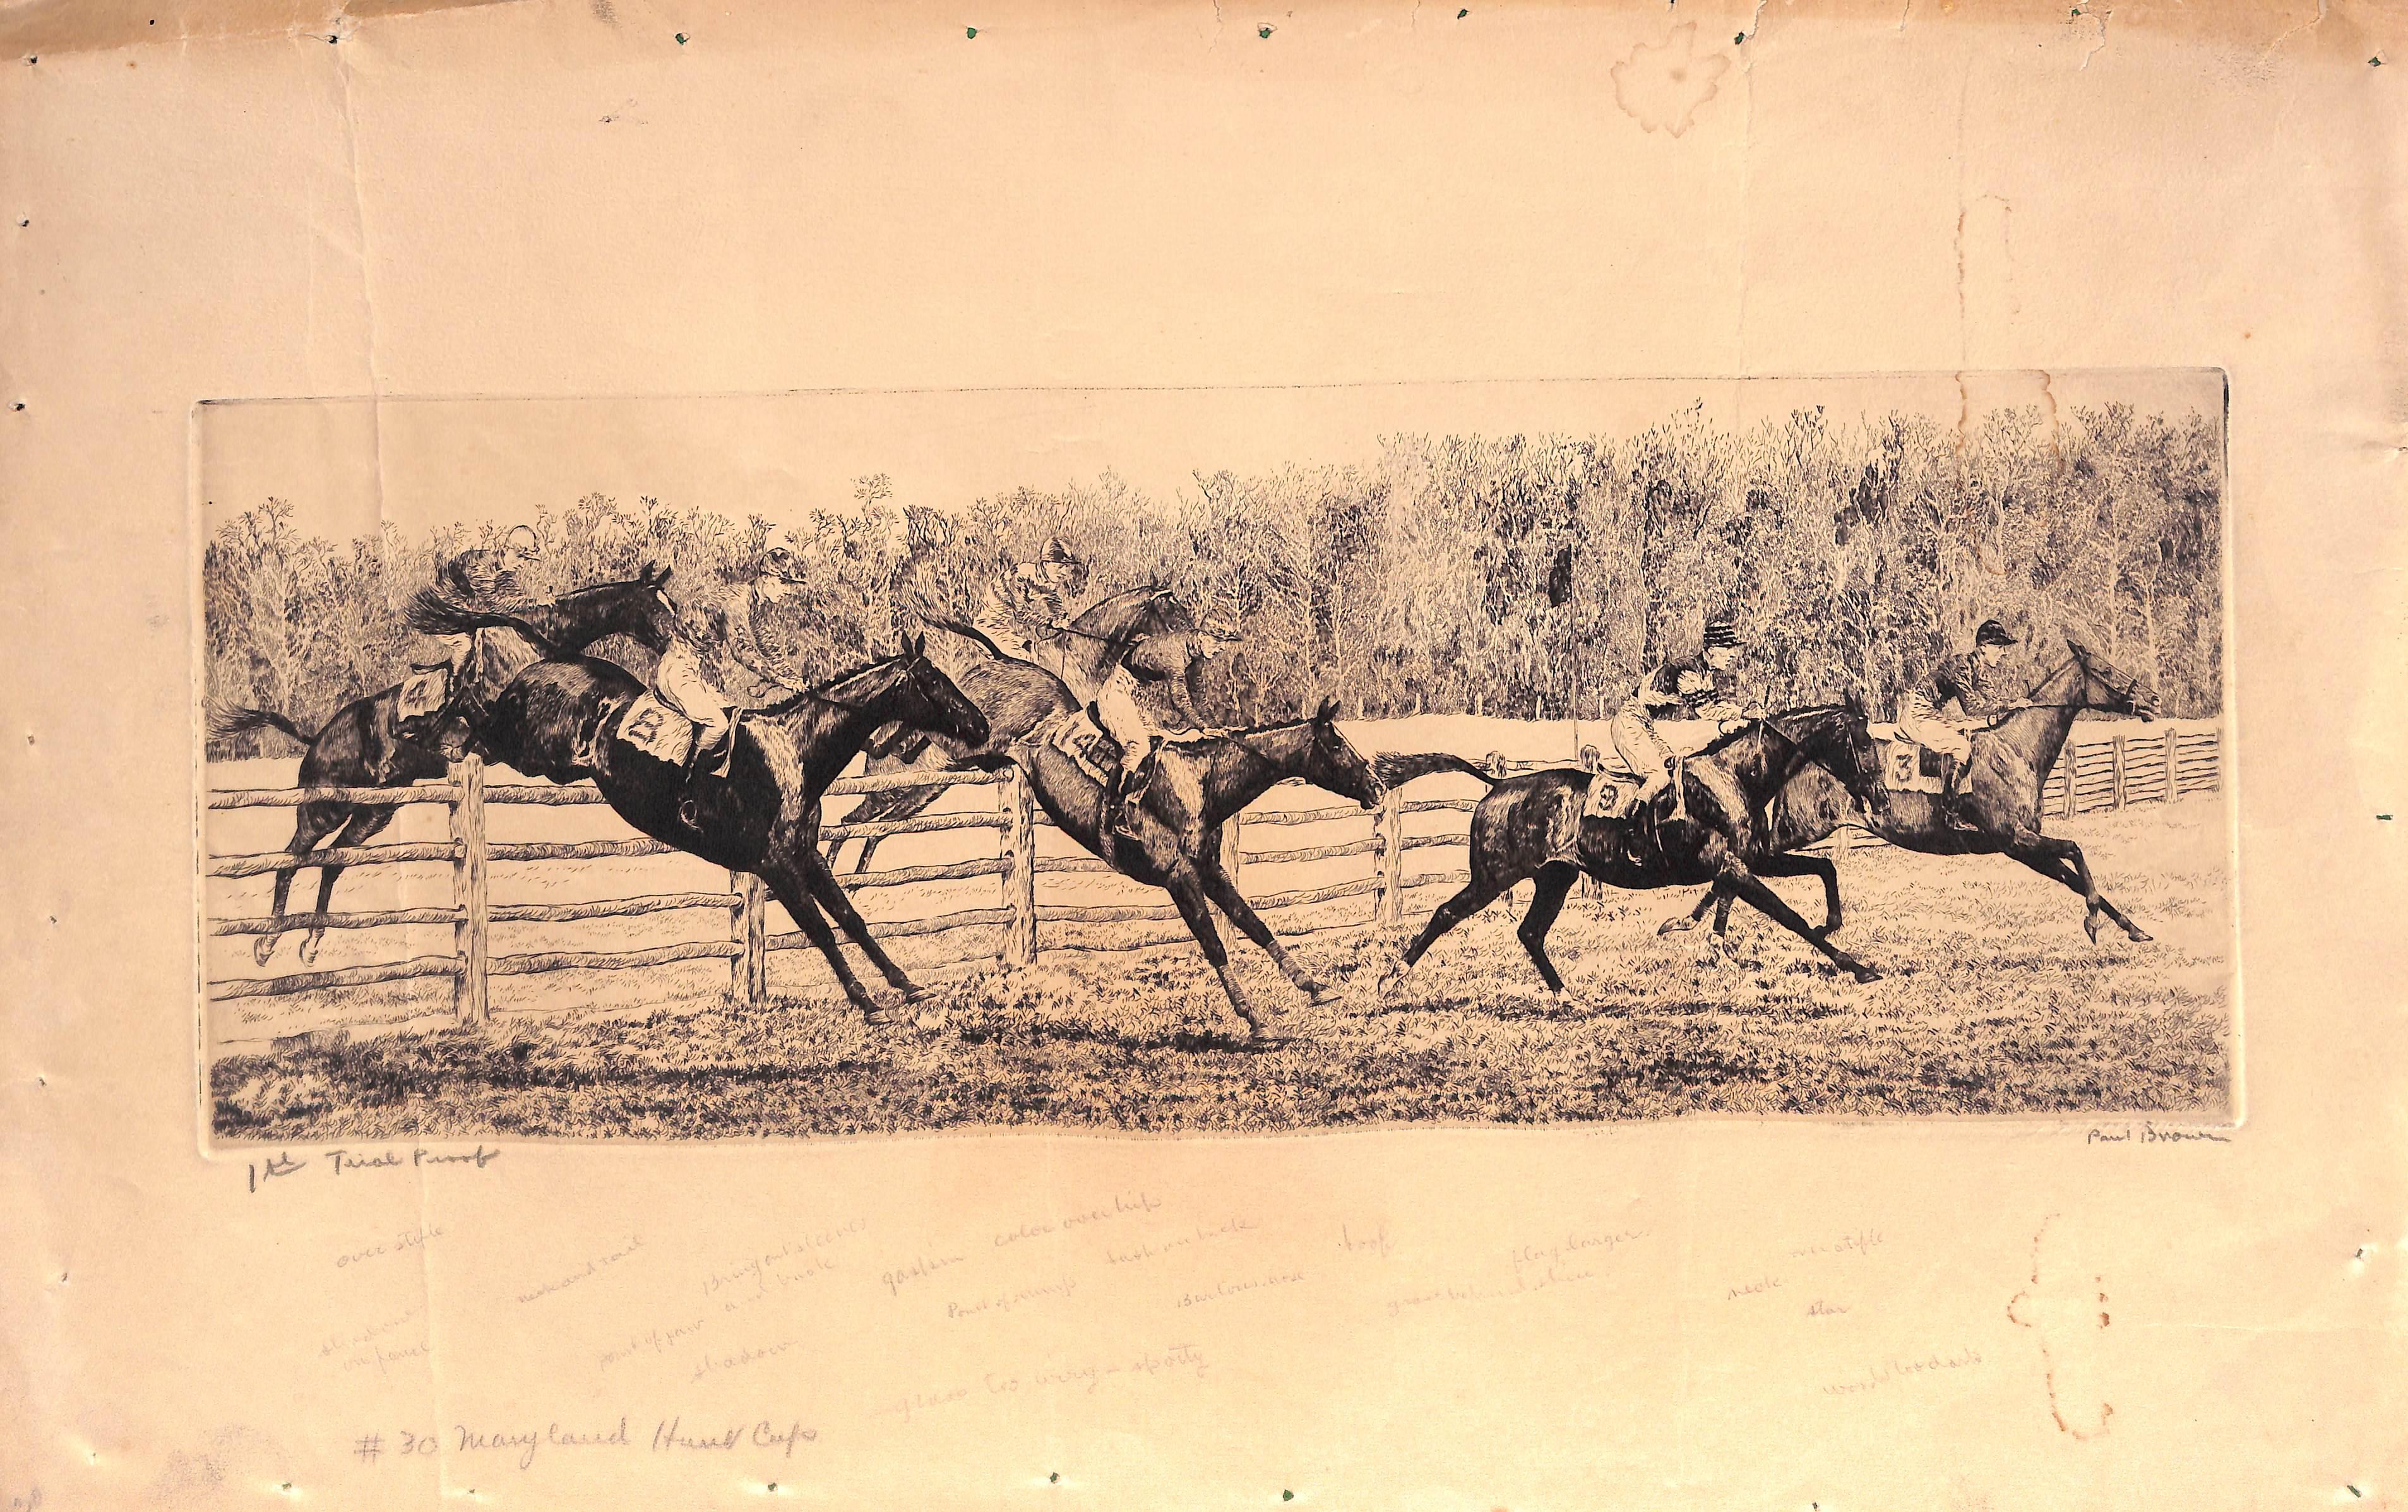 Paul Brown ""Maryland Hunt Cup" 1st Trial Proof Drypoint Radierung